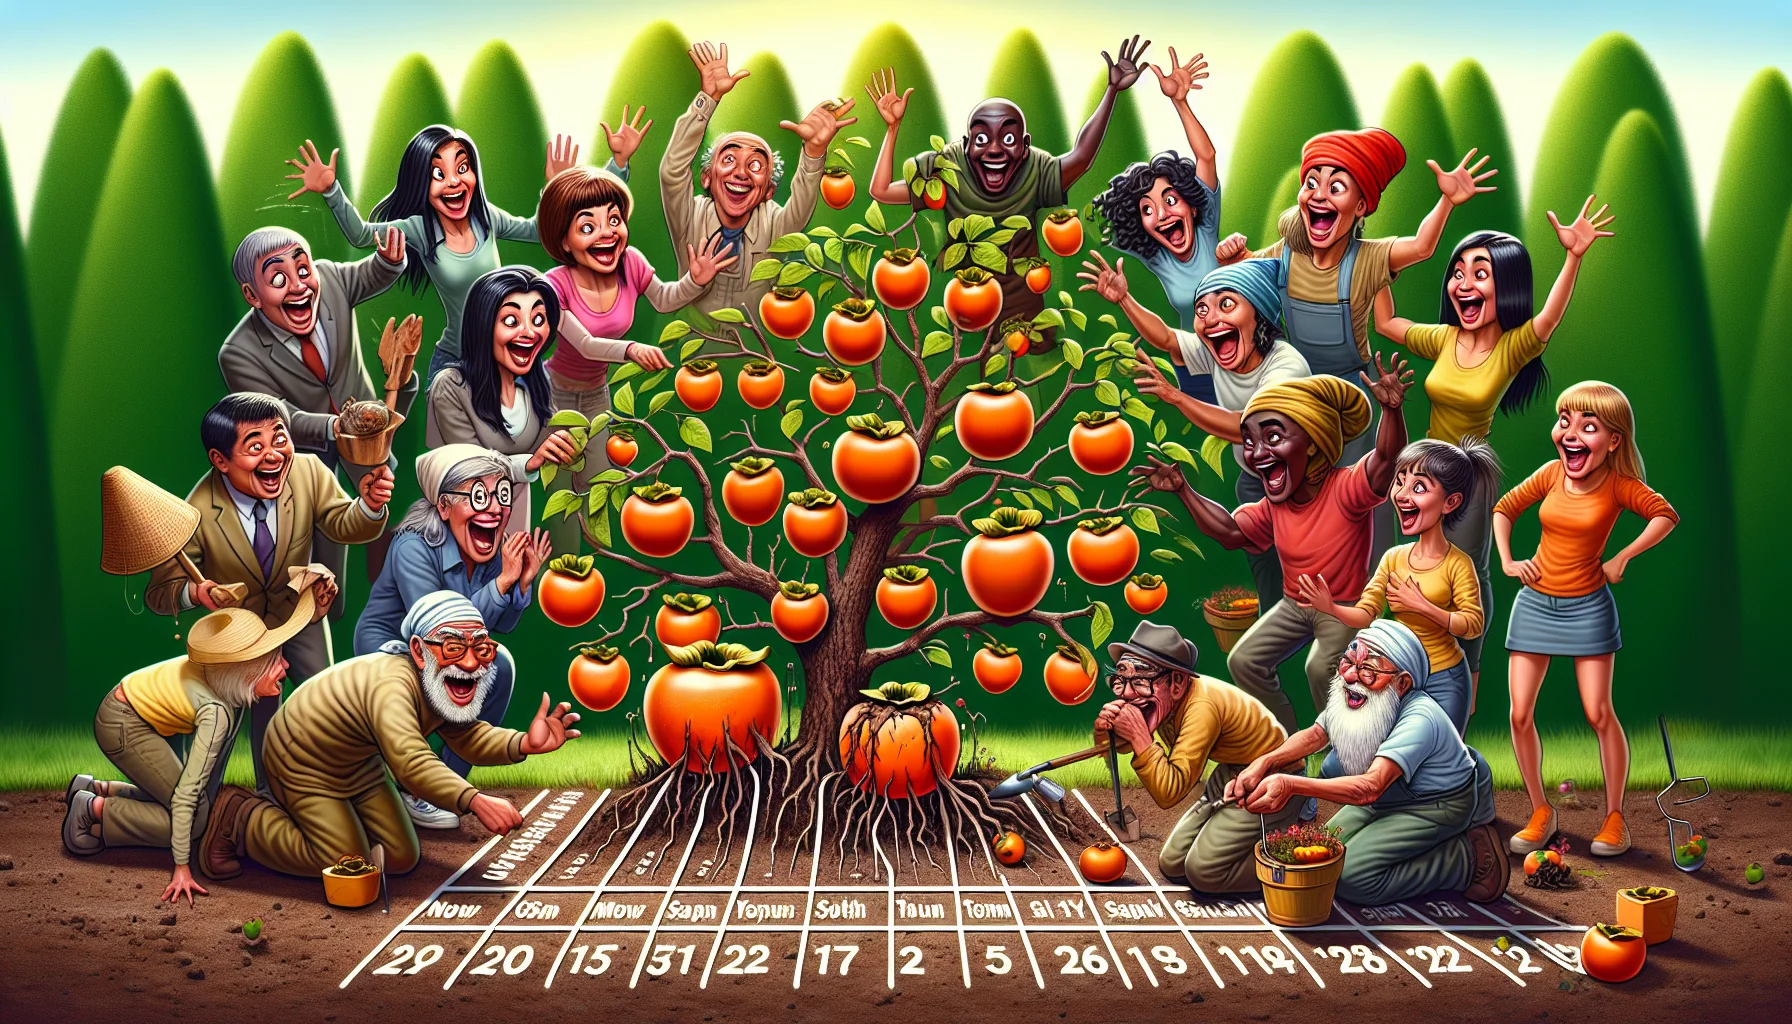 Create a humorous and appealing image that displays the timeline of a persimmon tree ripening its fruits. Picture this in a garden setting, with exaggerated, cartoon-style calendar markings to show the passage of time. Include a variety of diverse gardeners of different genders and descents (Caucasian, Black, South Asian, Hispanic and Middle-Eastern men and women) visibly marveling at the tree's transformation, their faces lit up with anticipation and joy. Their playful and lively interactions create a funny scenario, enticing viewers to partake in the joy of gardening.